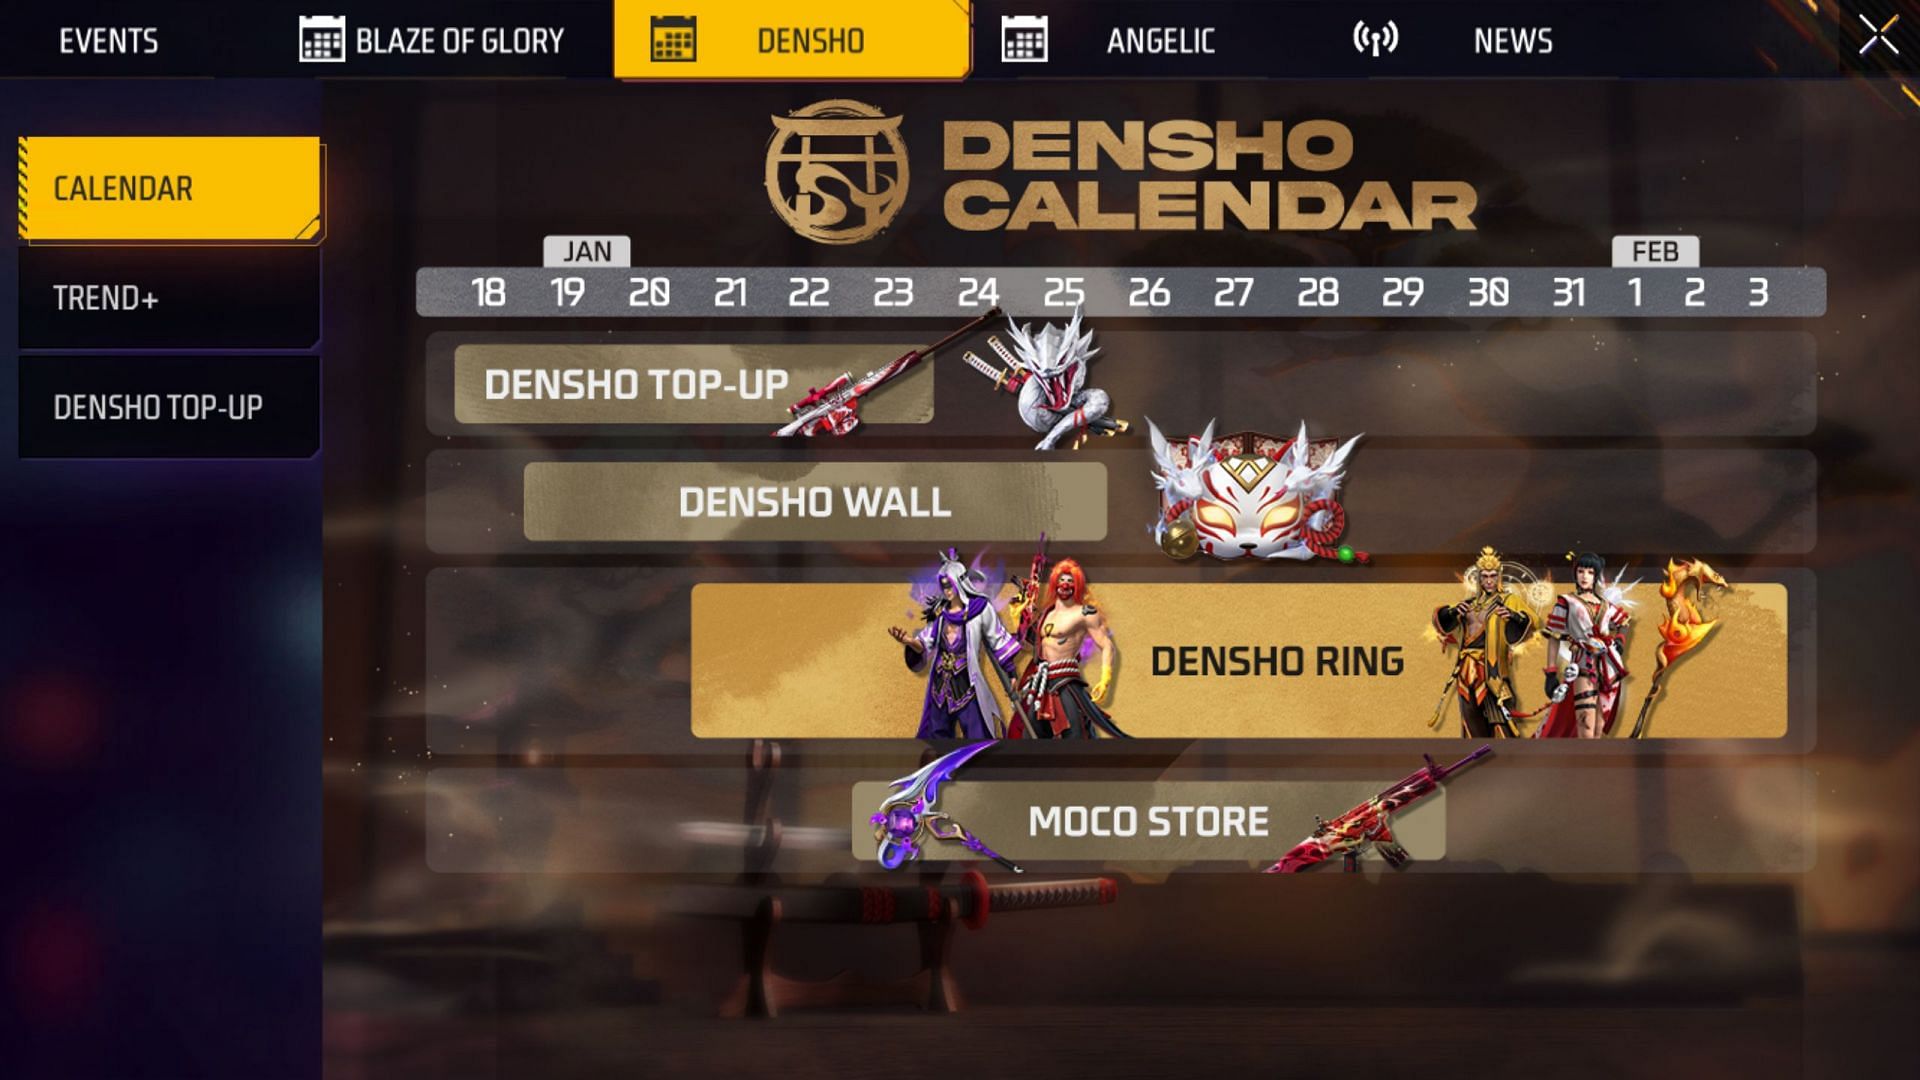 Select the Densho Top-Up from the menu on the left (Image via Garena)